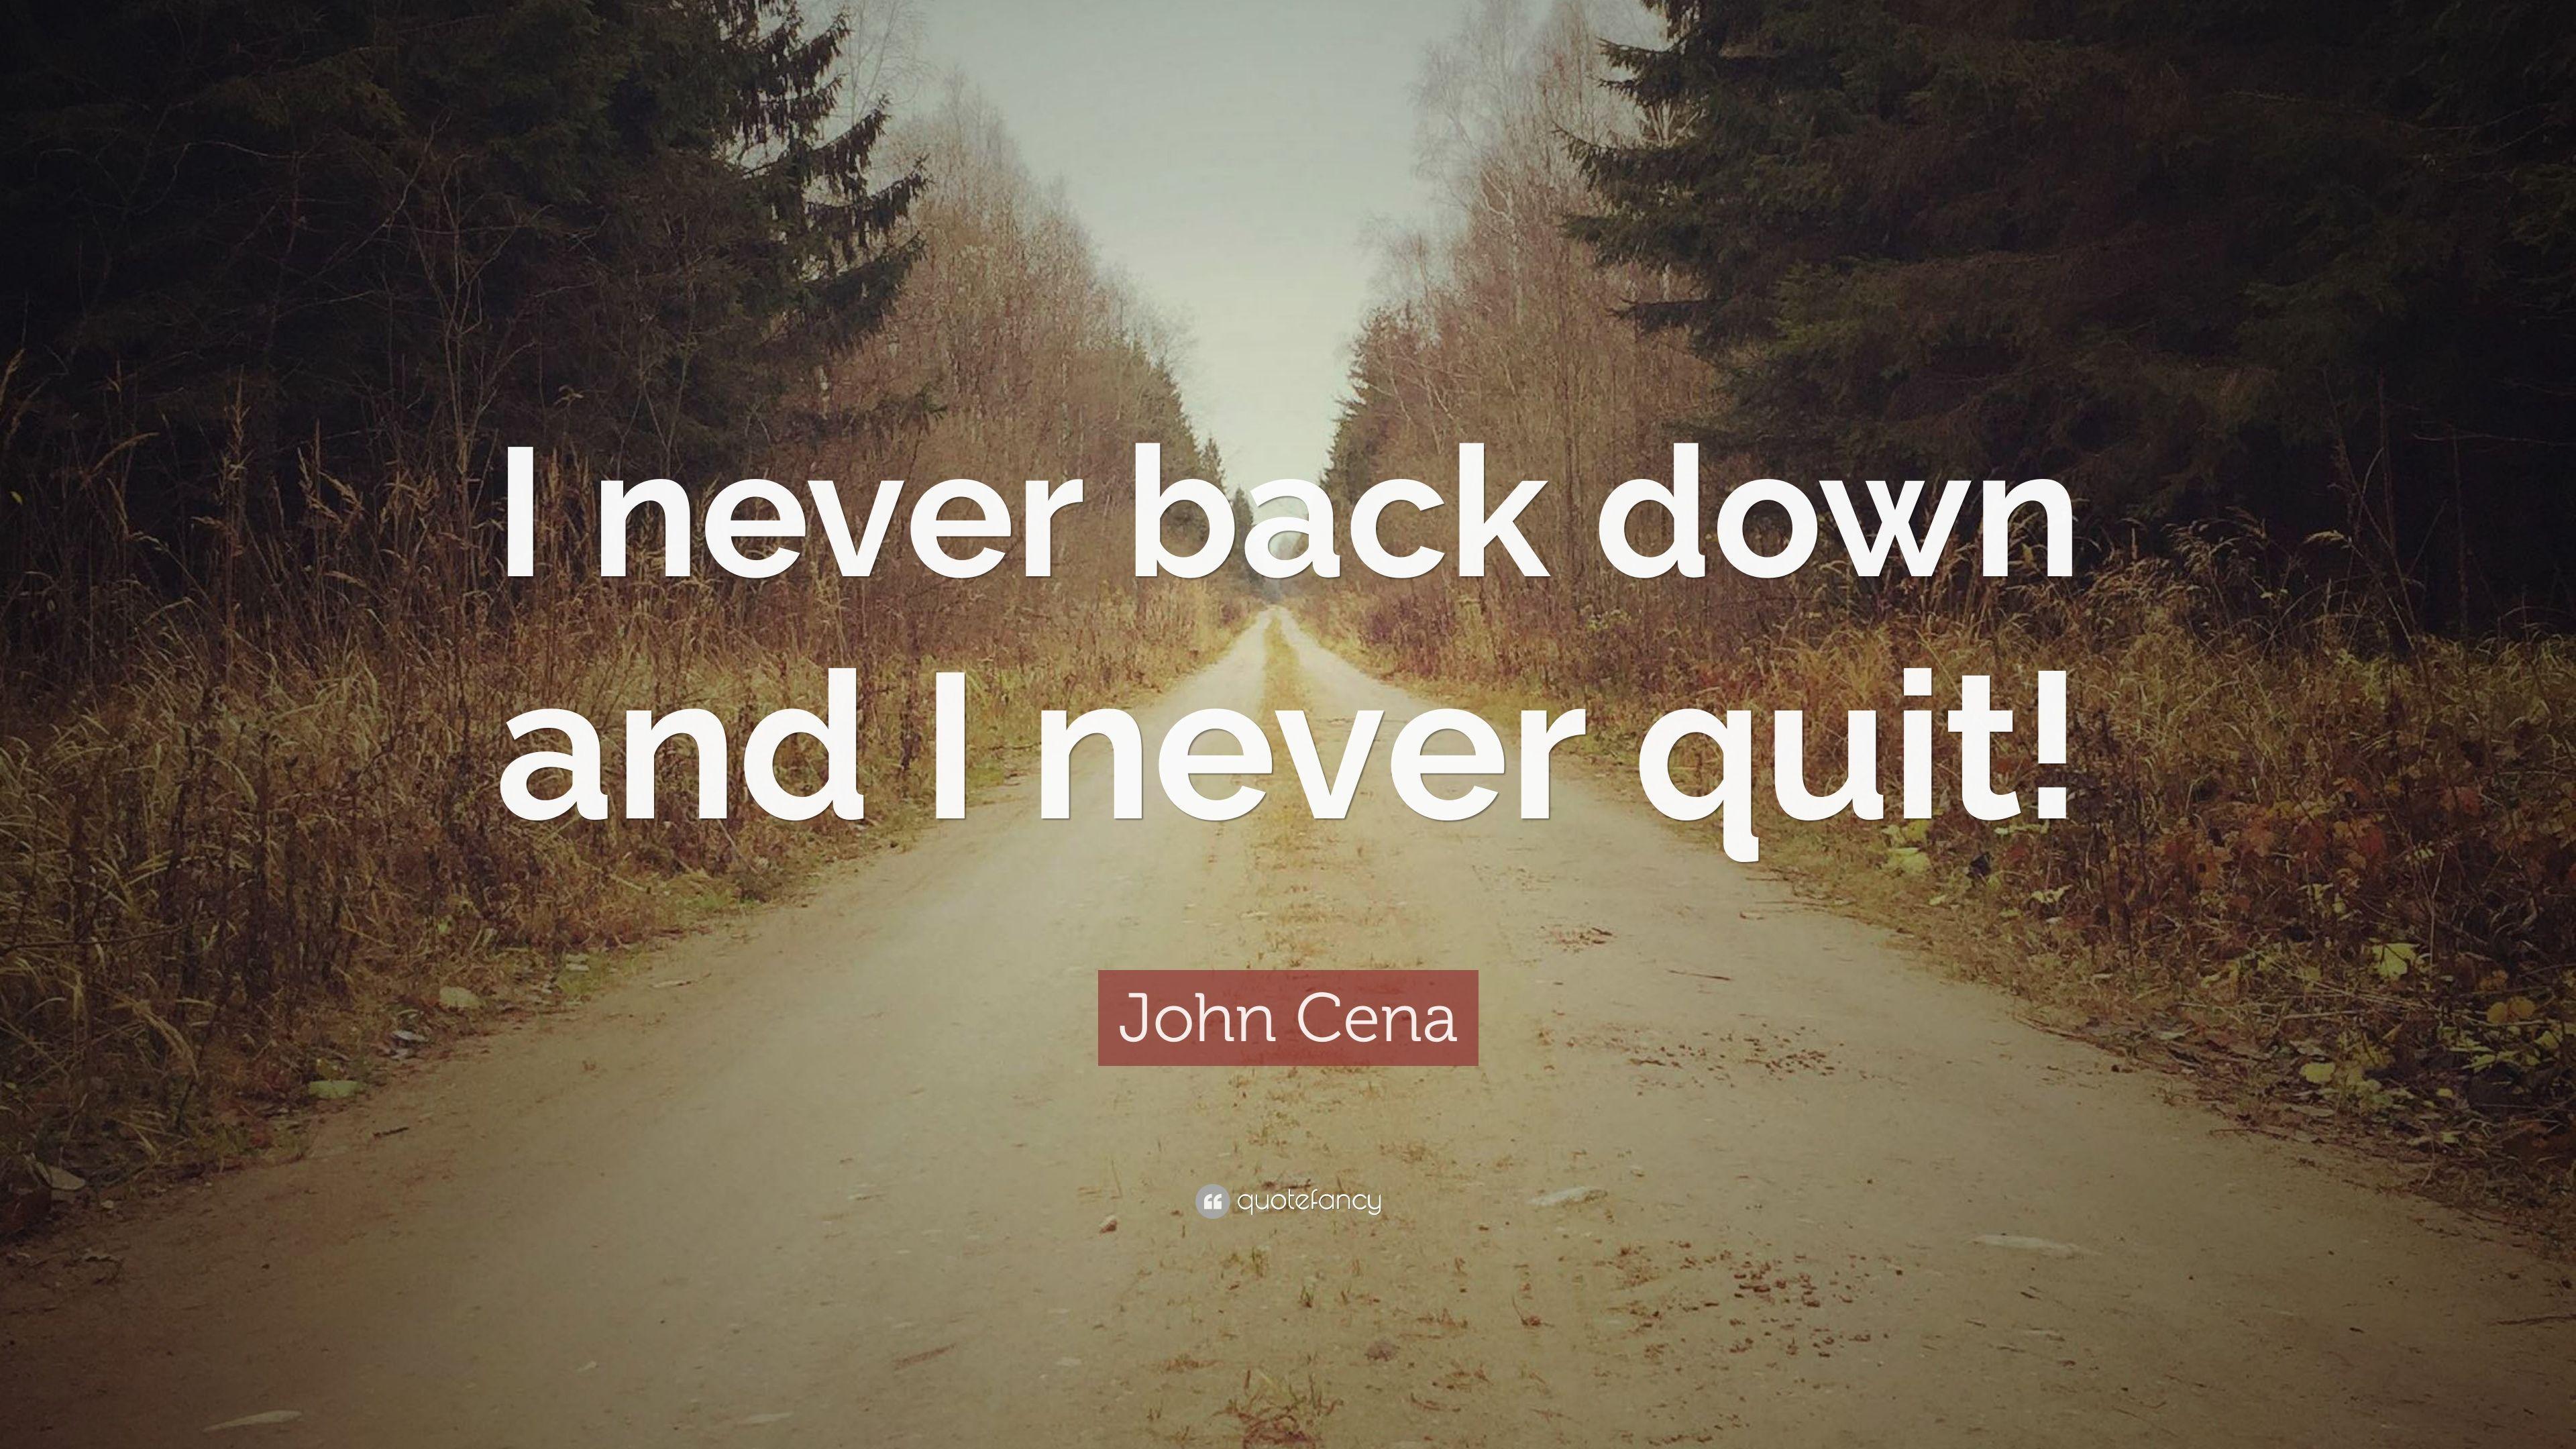 John Cena Quote: “I never back down and I never quit!” (12 wallpaper)